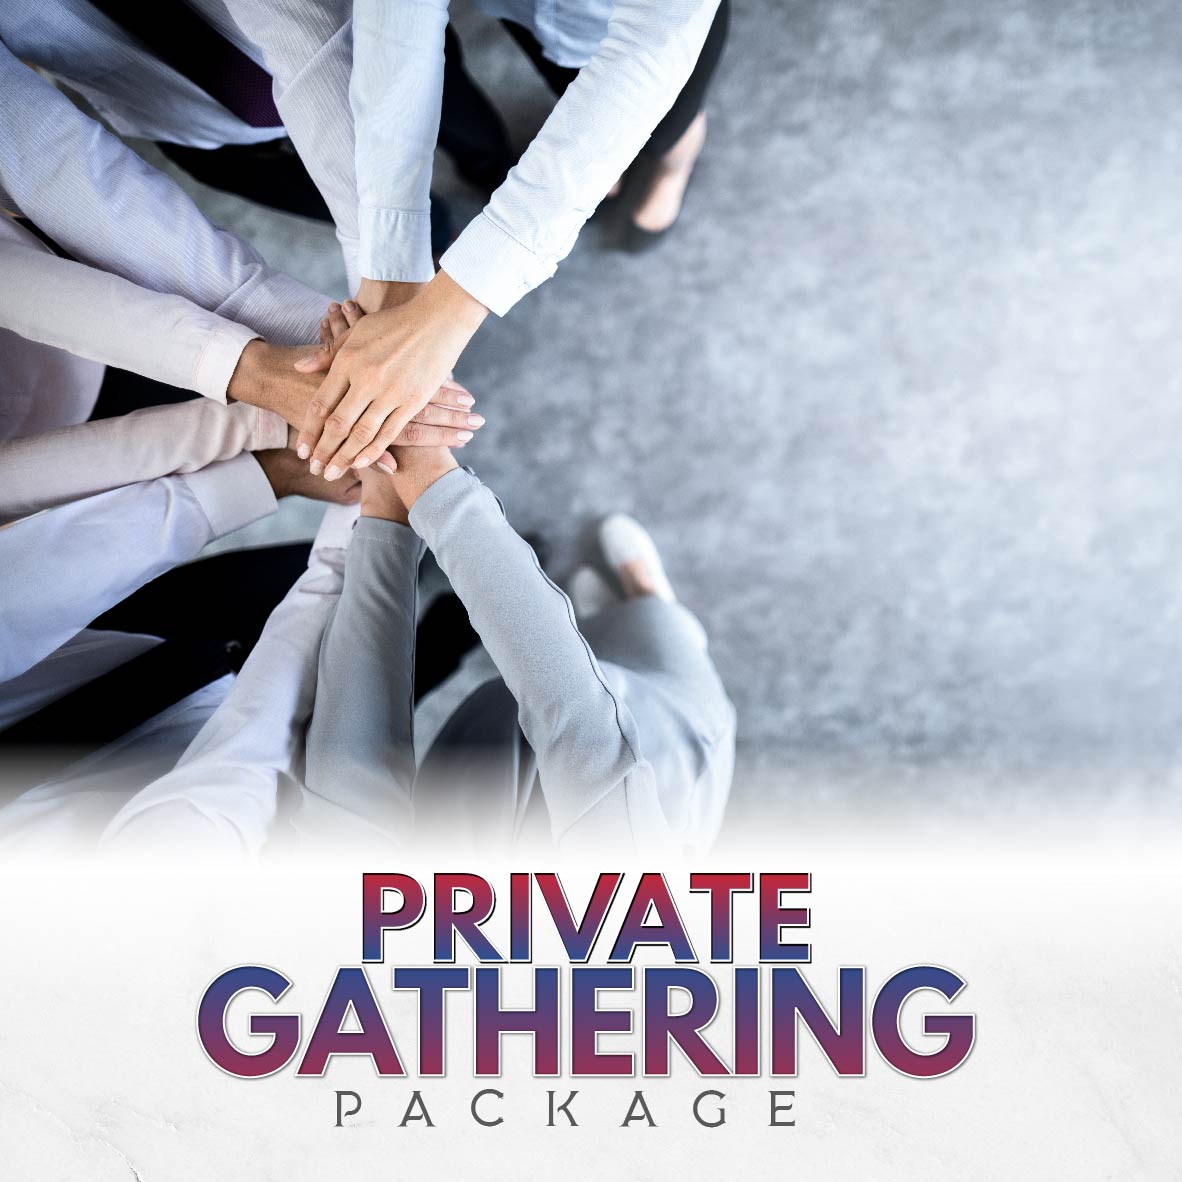 Private Gathering Package